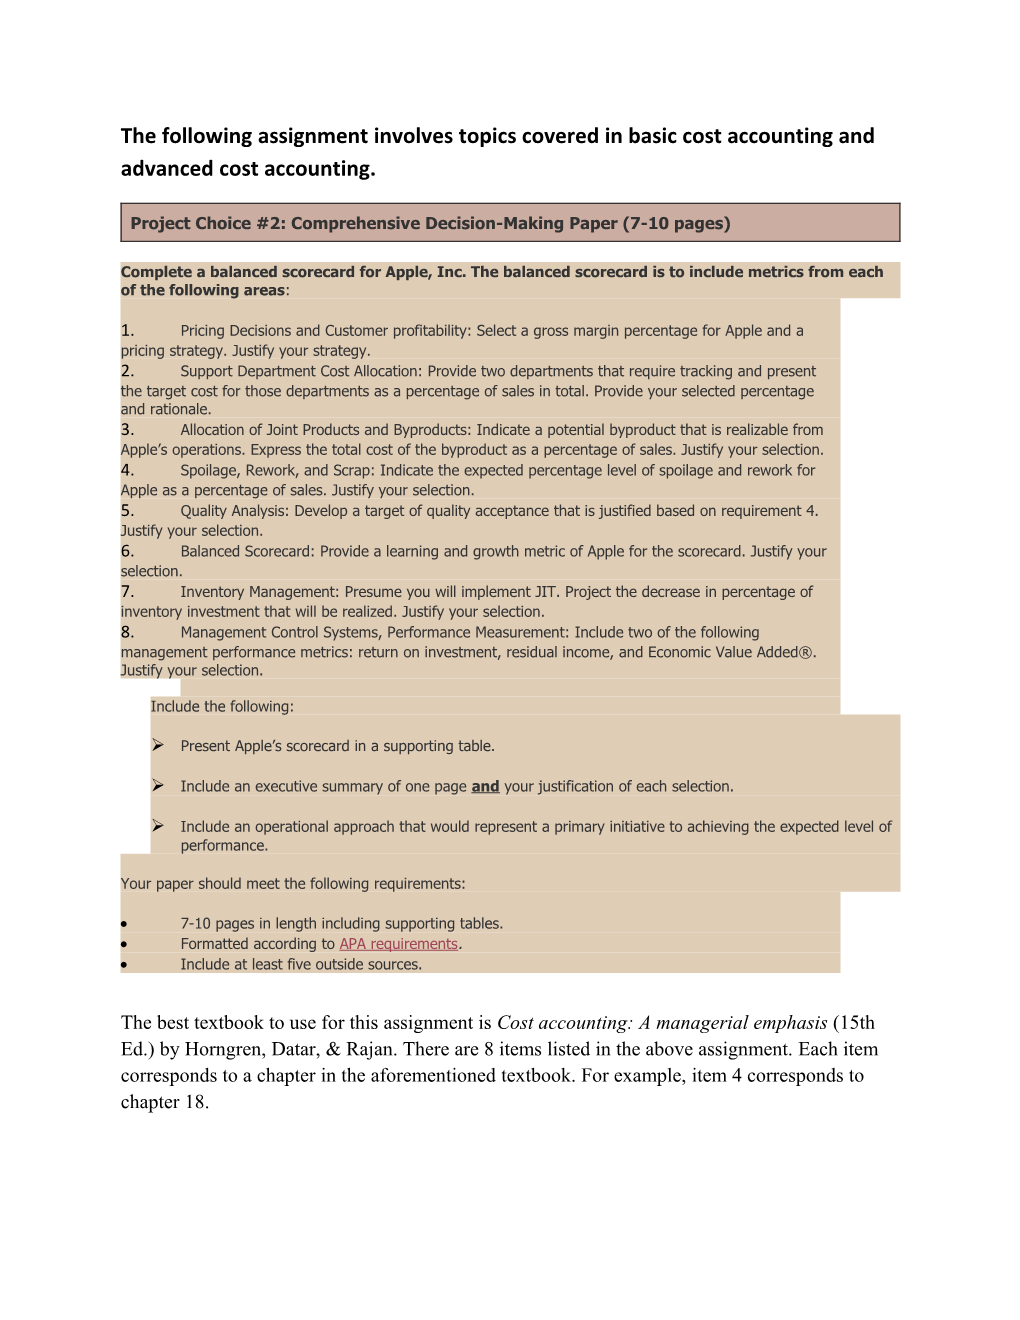 The Following Assignment Involves Topics Covered in Basic Cost Accounting and Advancedcost